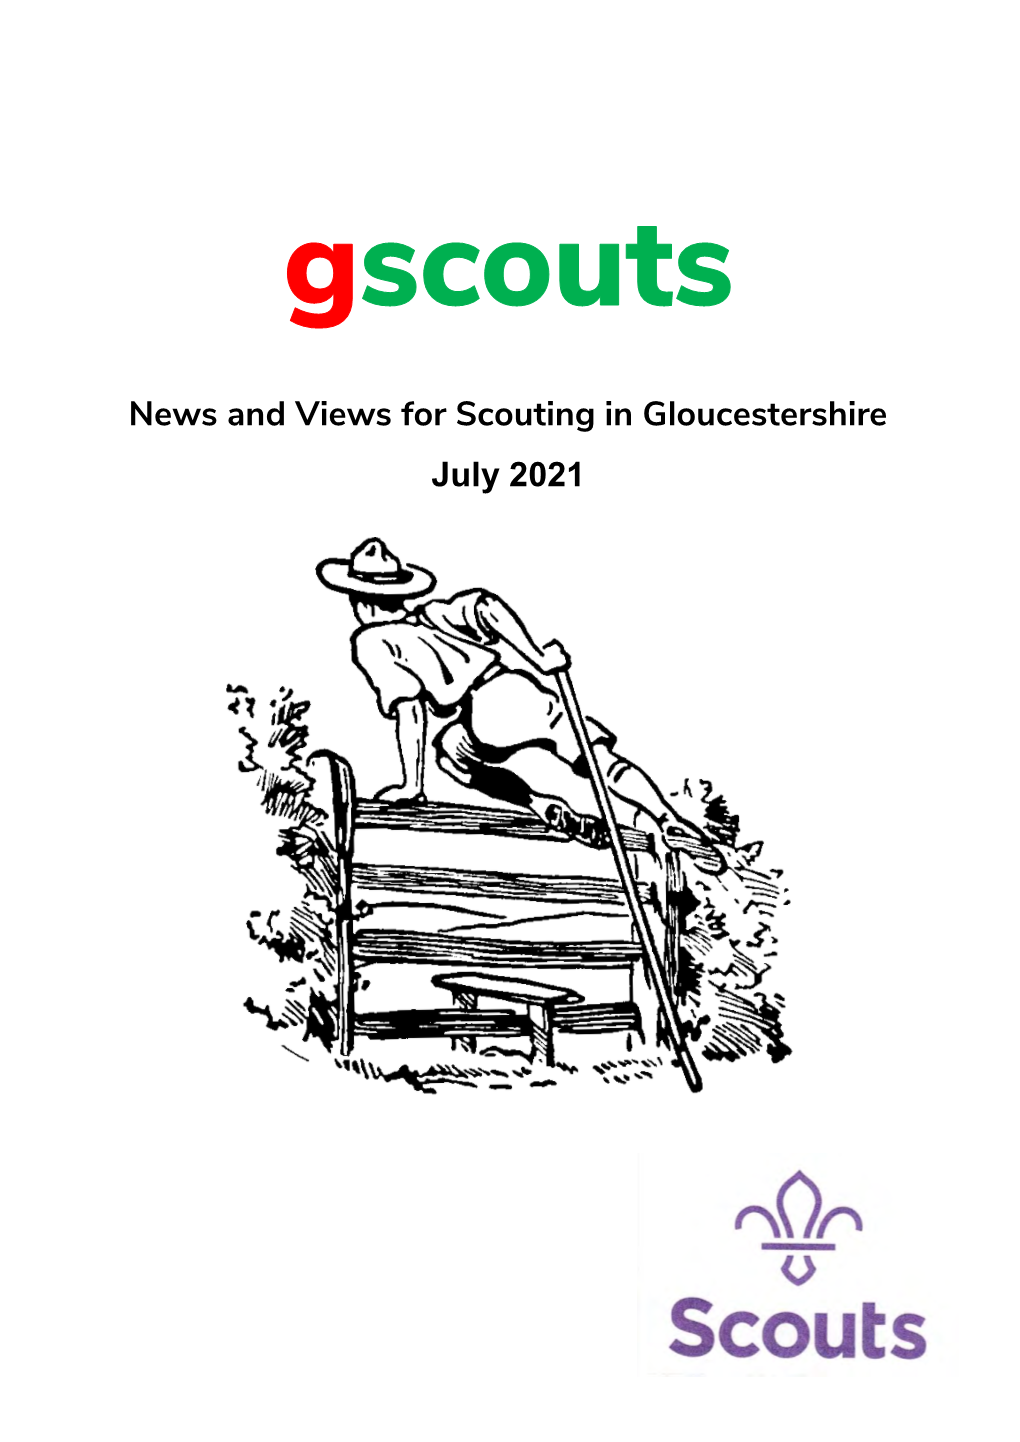 News and Views for Scouting in Gloucestershire July 2021